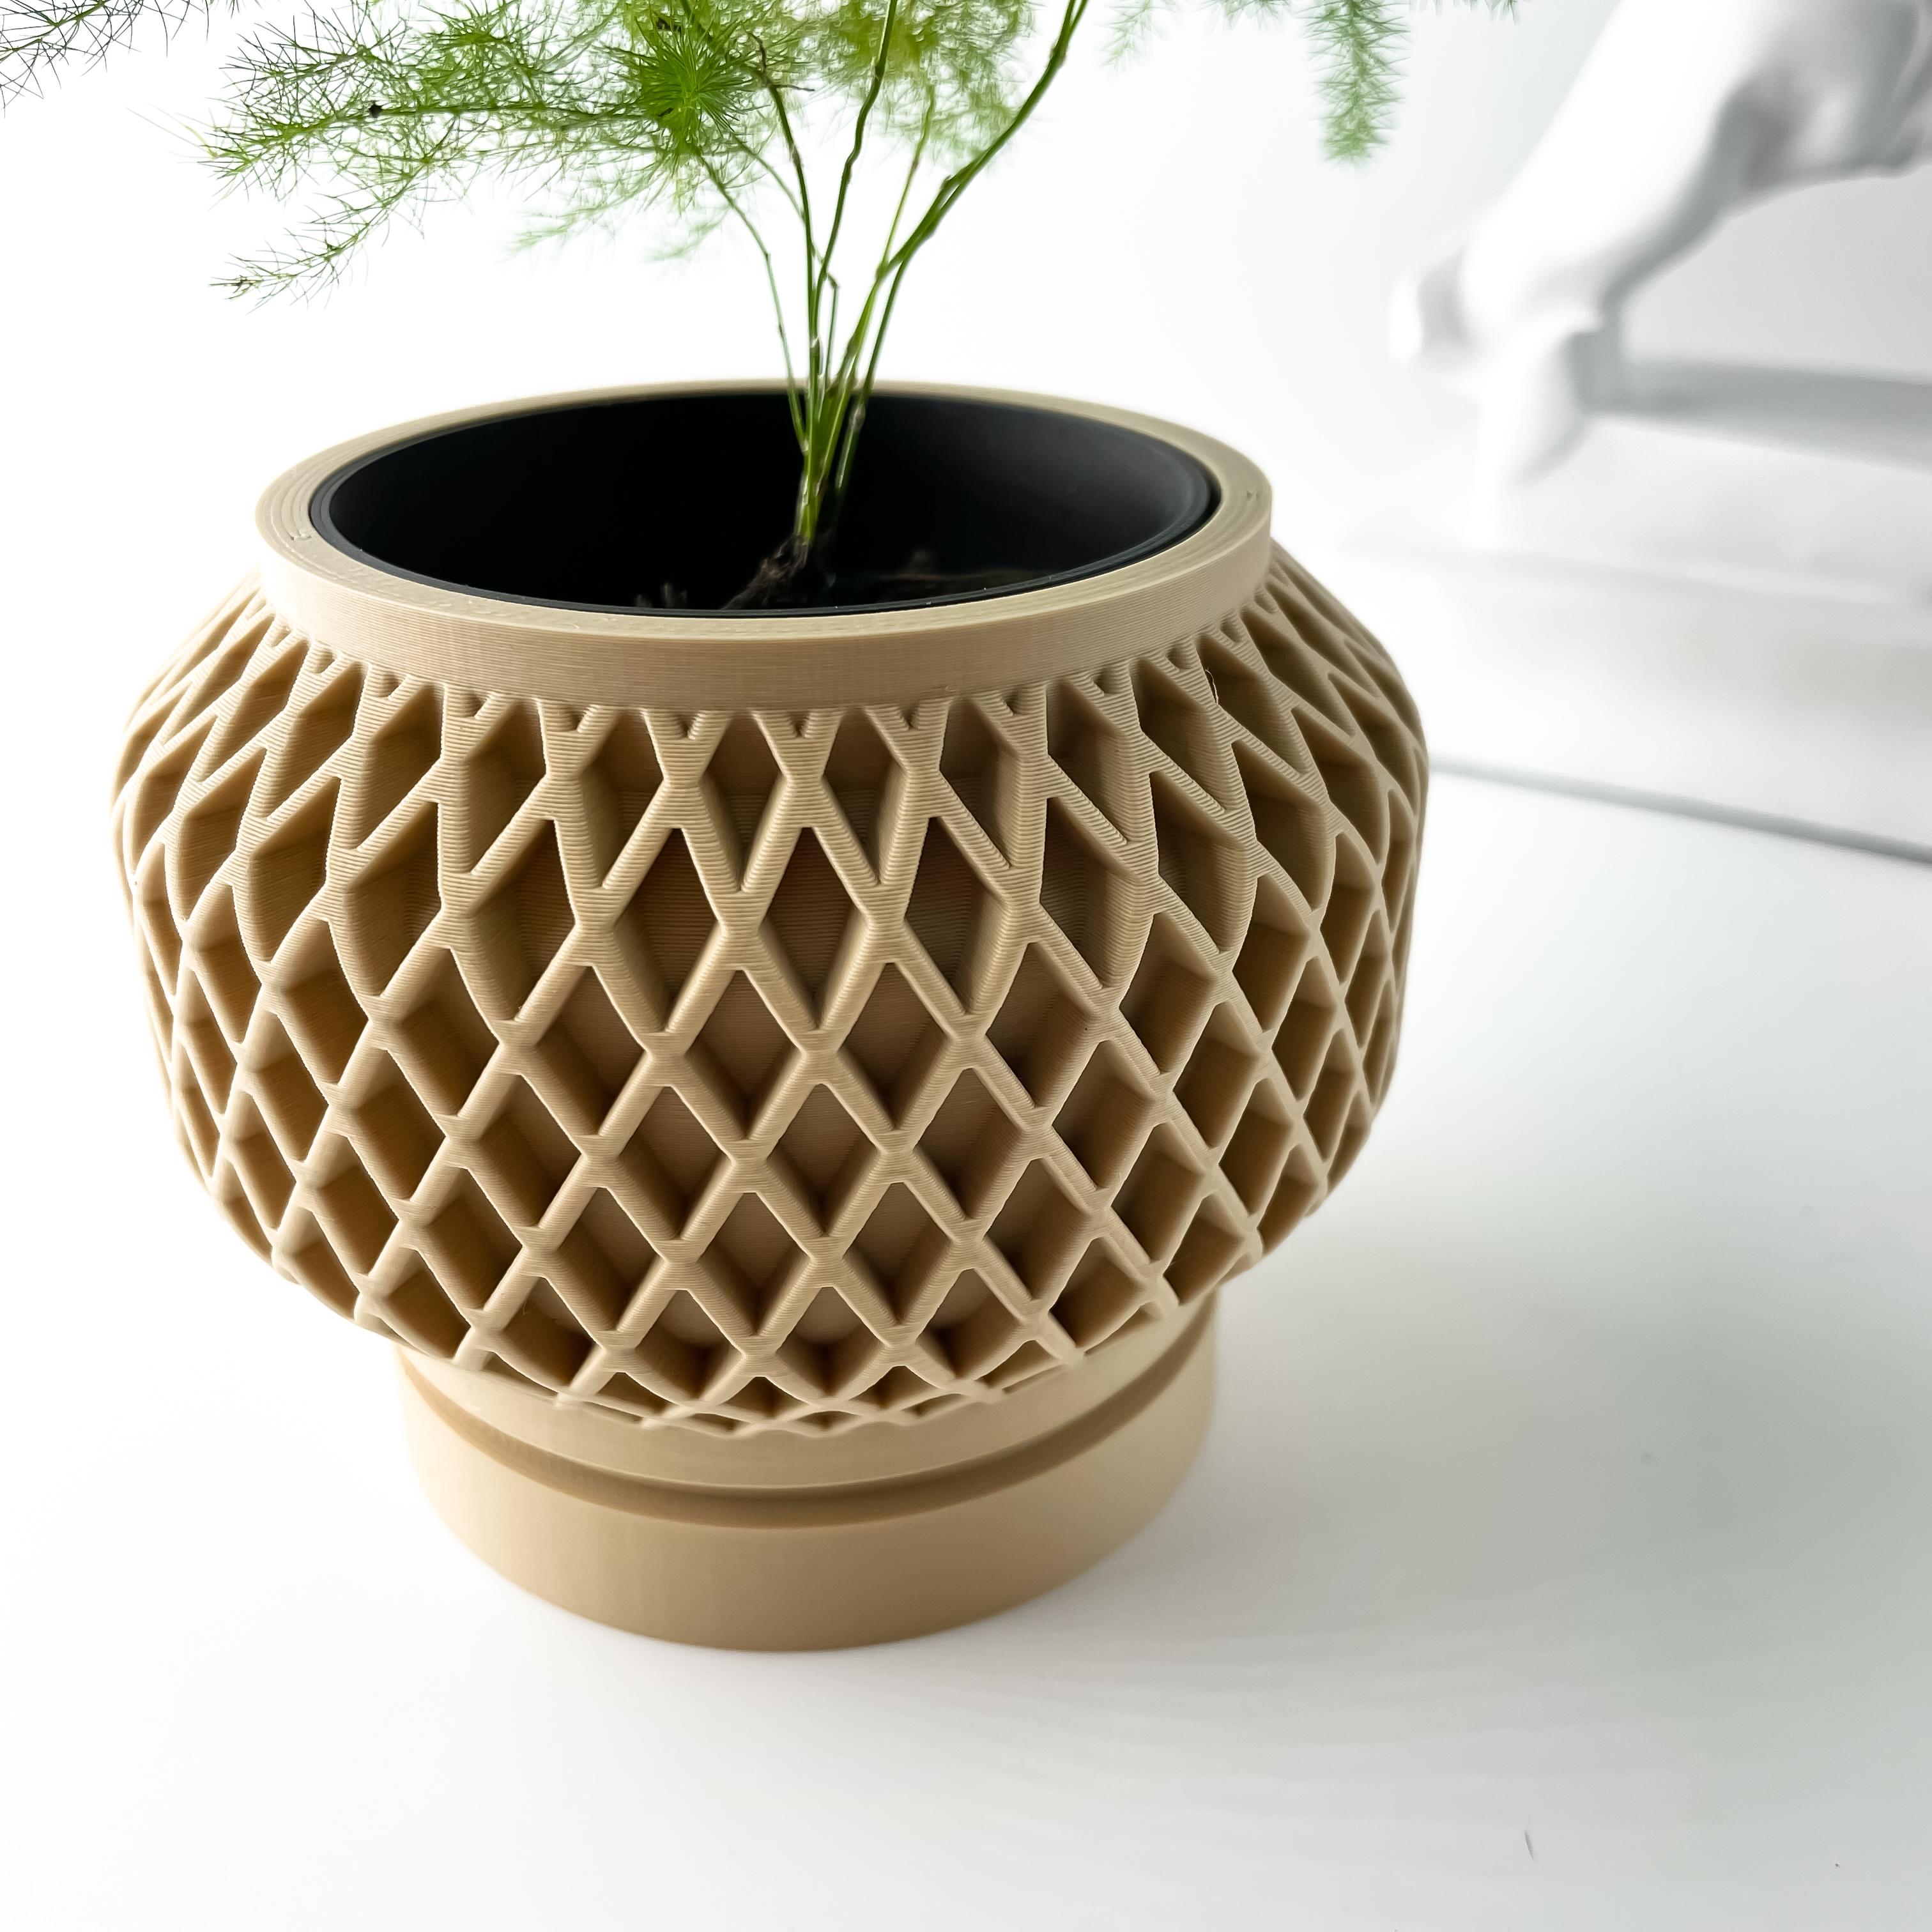 The Orto Planter Pot with Drainage Tray & Stand | Modern and Unique Home Decor for Plants 3d model